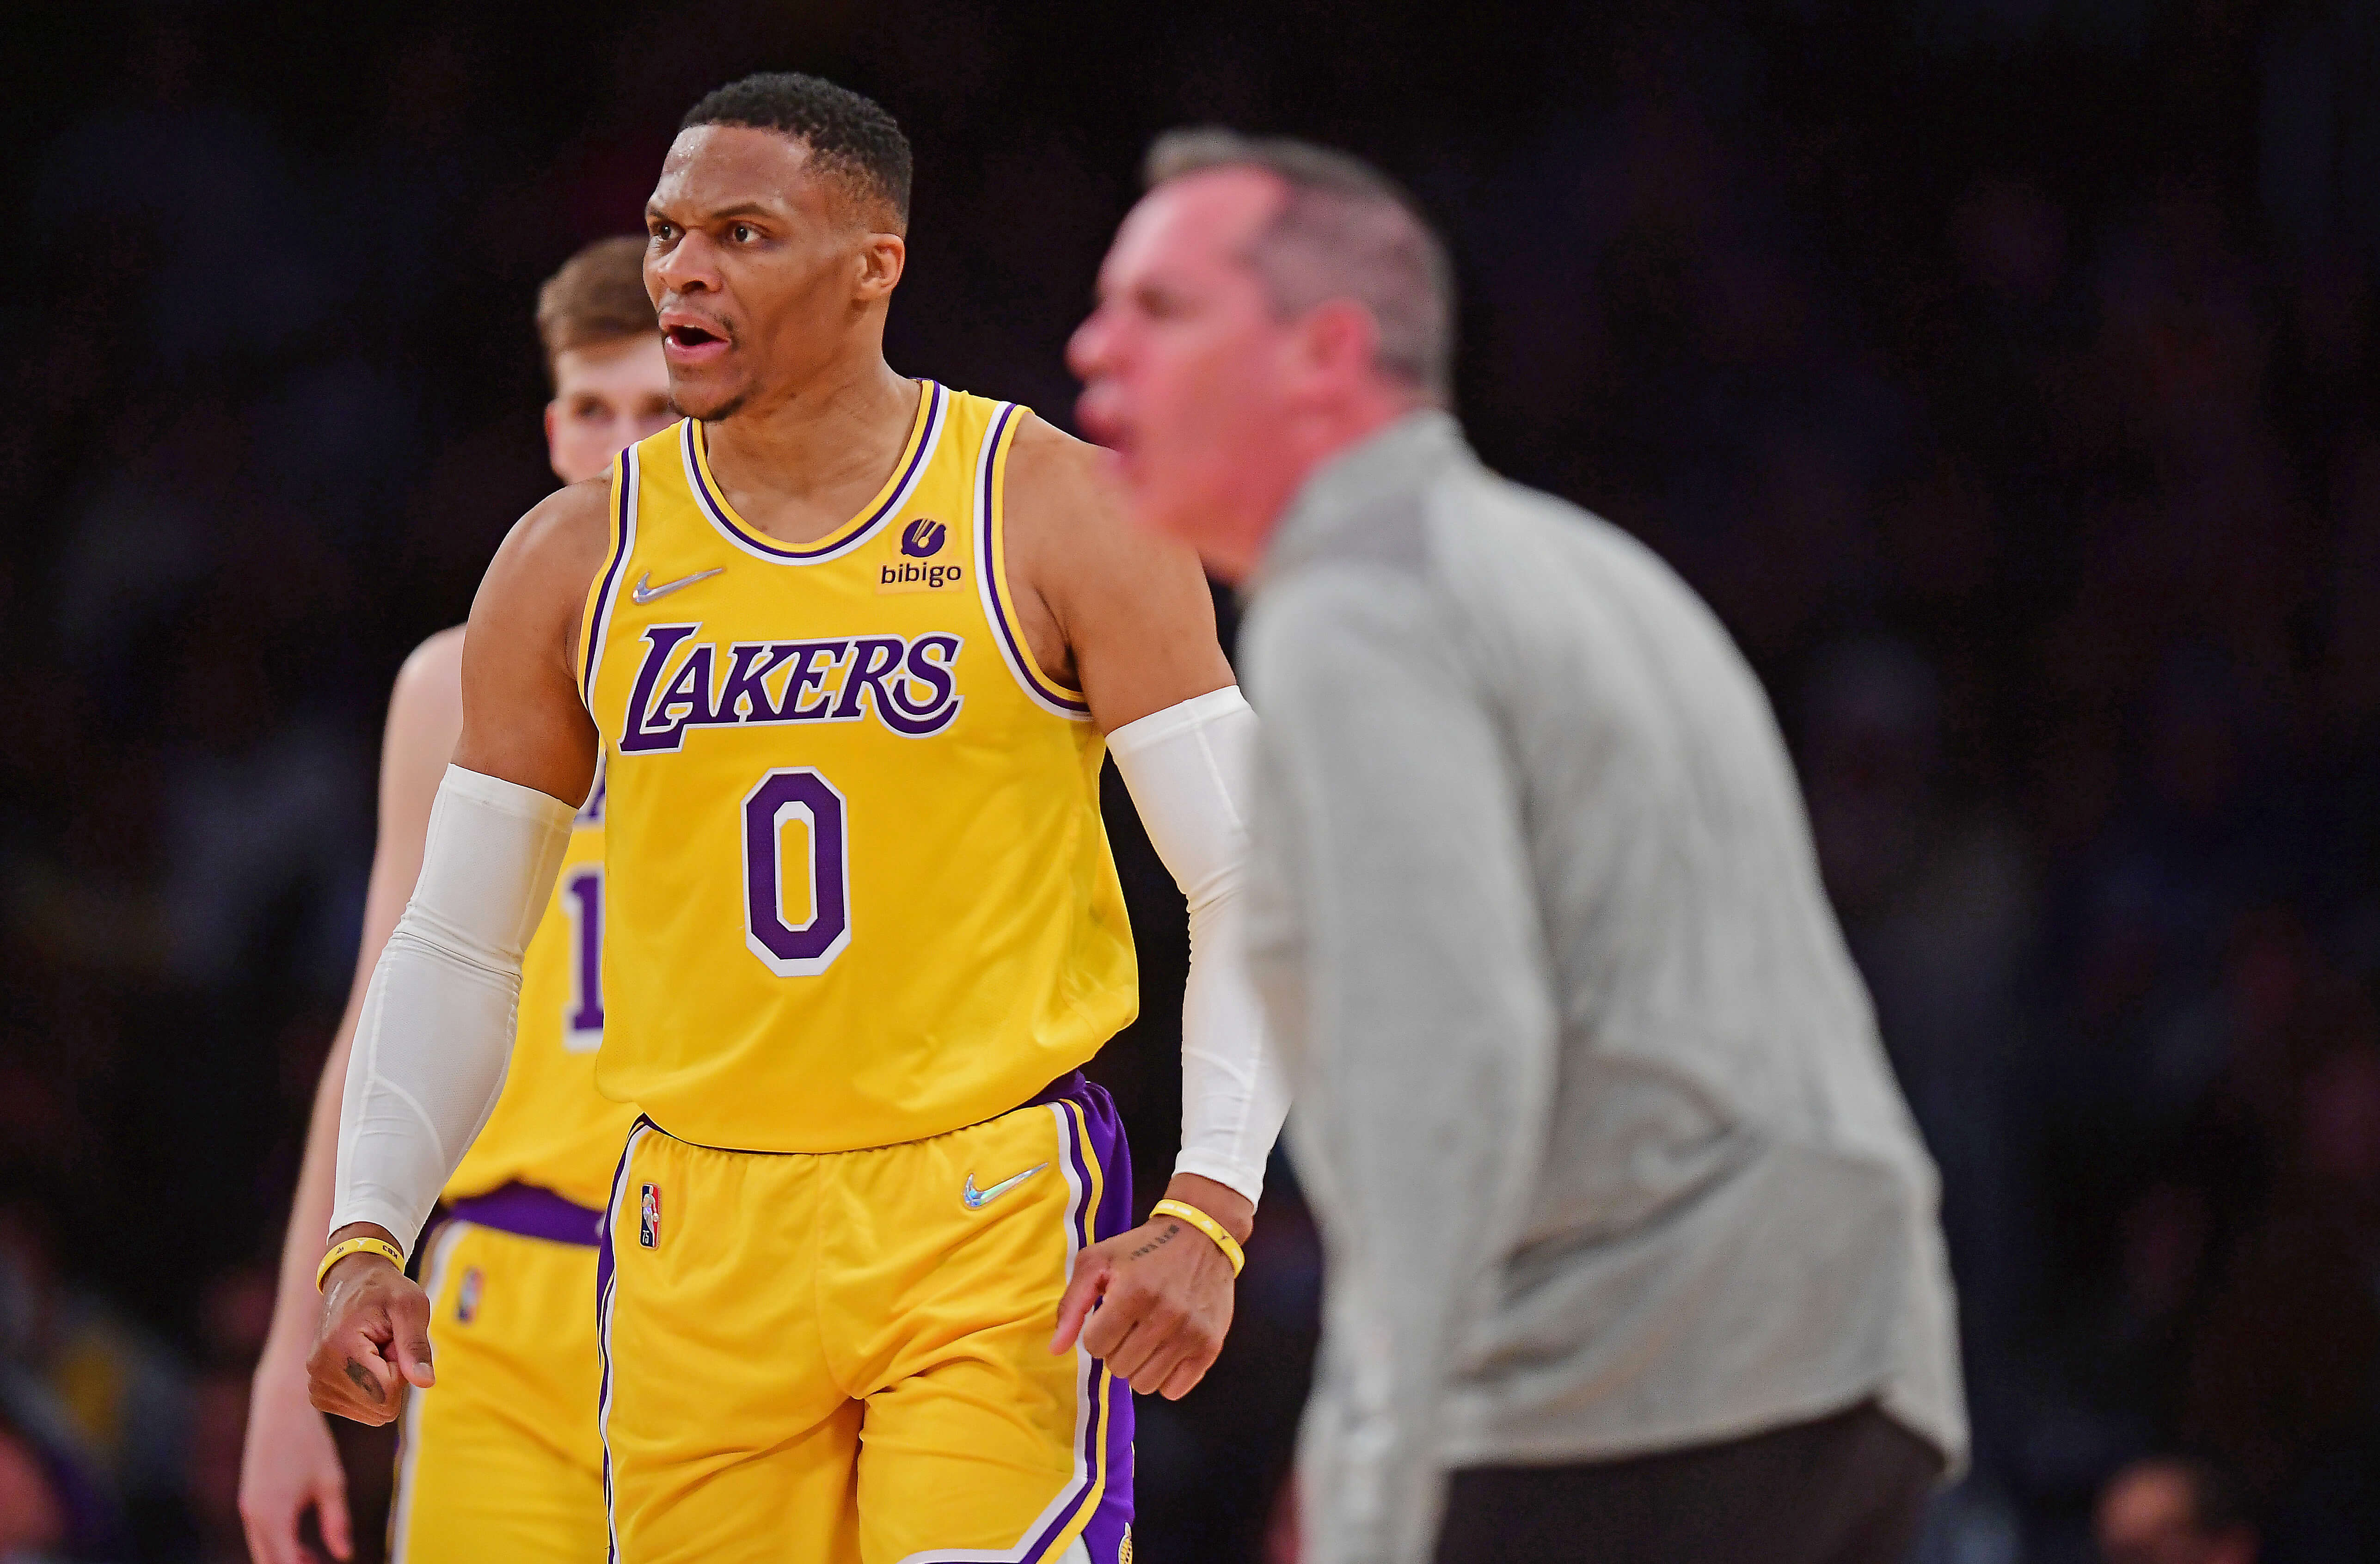 James' best effort not good enough as Clippers put away Lakers